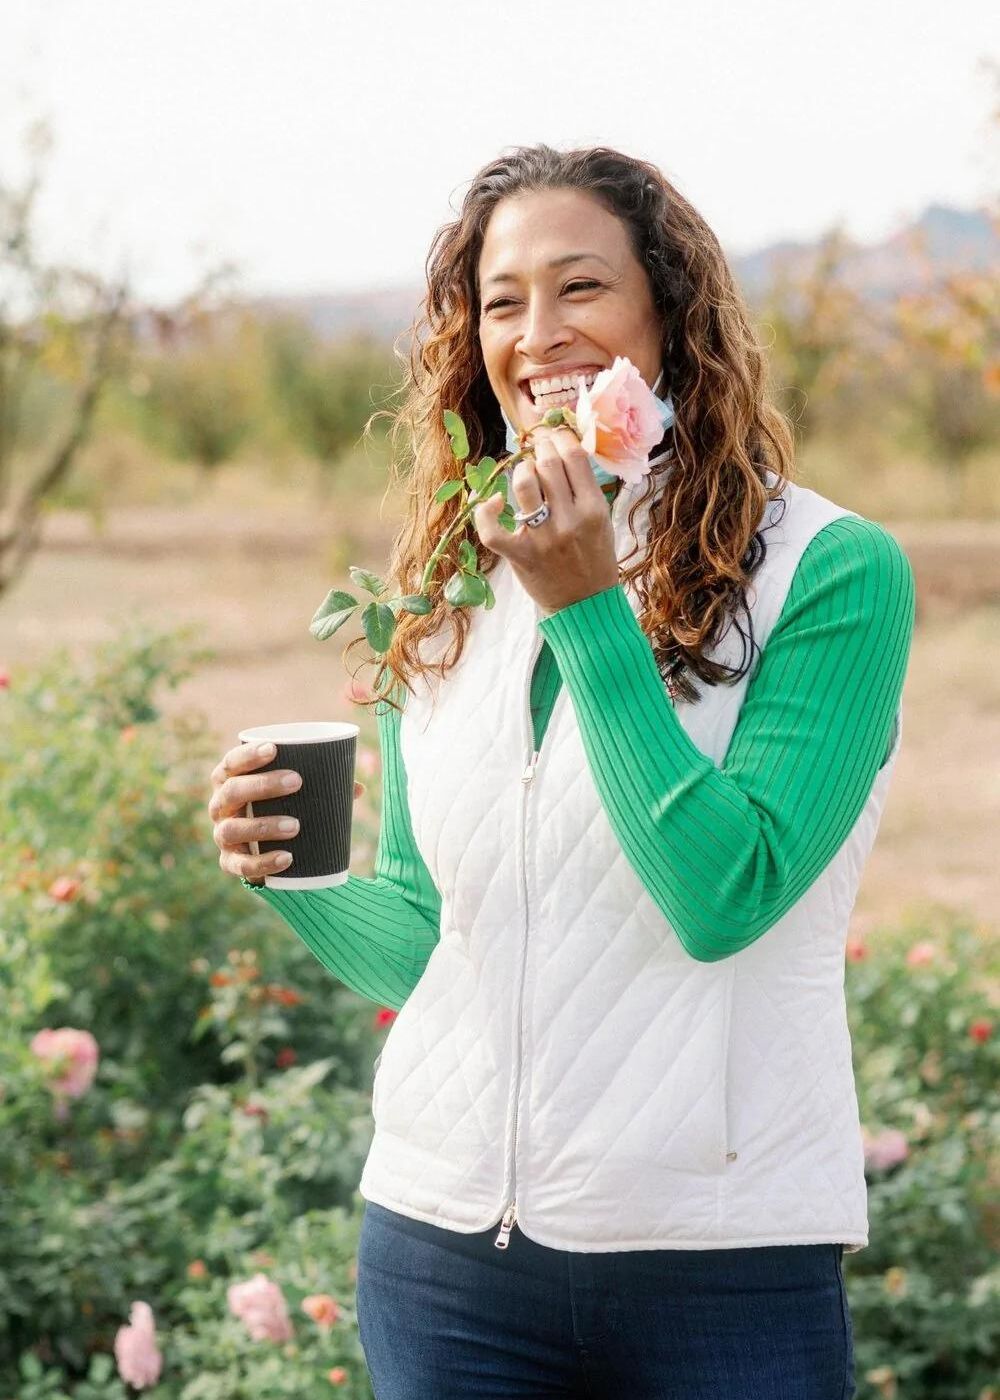 Designing A Garden With Roses A Workshop Featuring Shavonda Gardner | May 18, 2024 - Menagerie Farm &amp; Flower